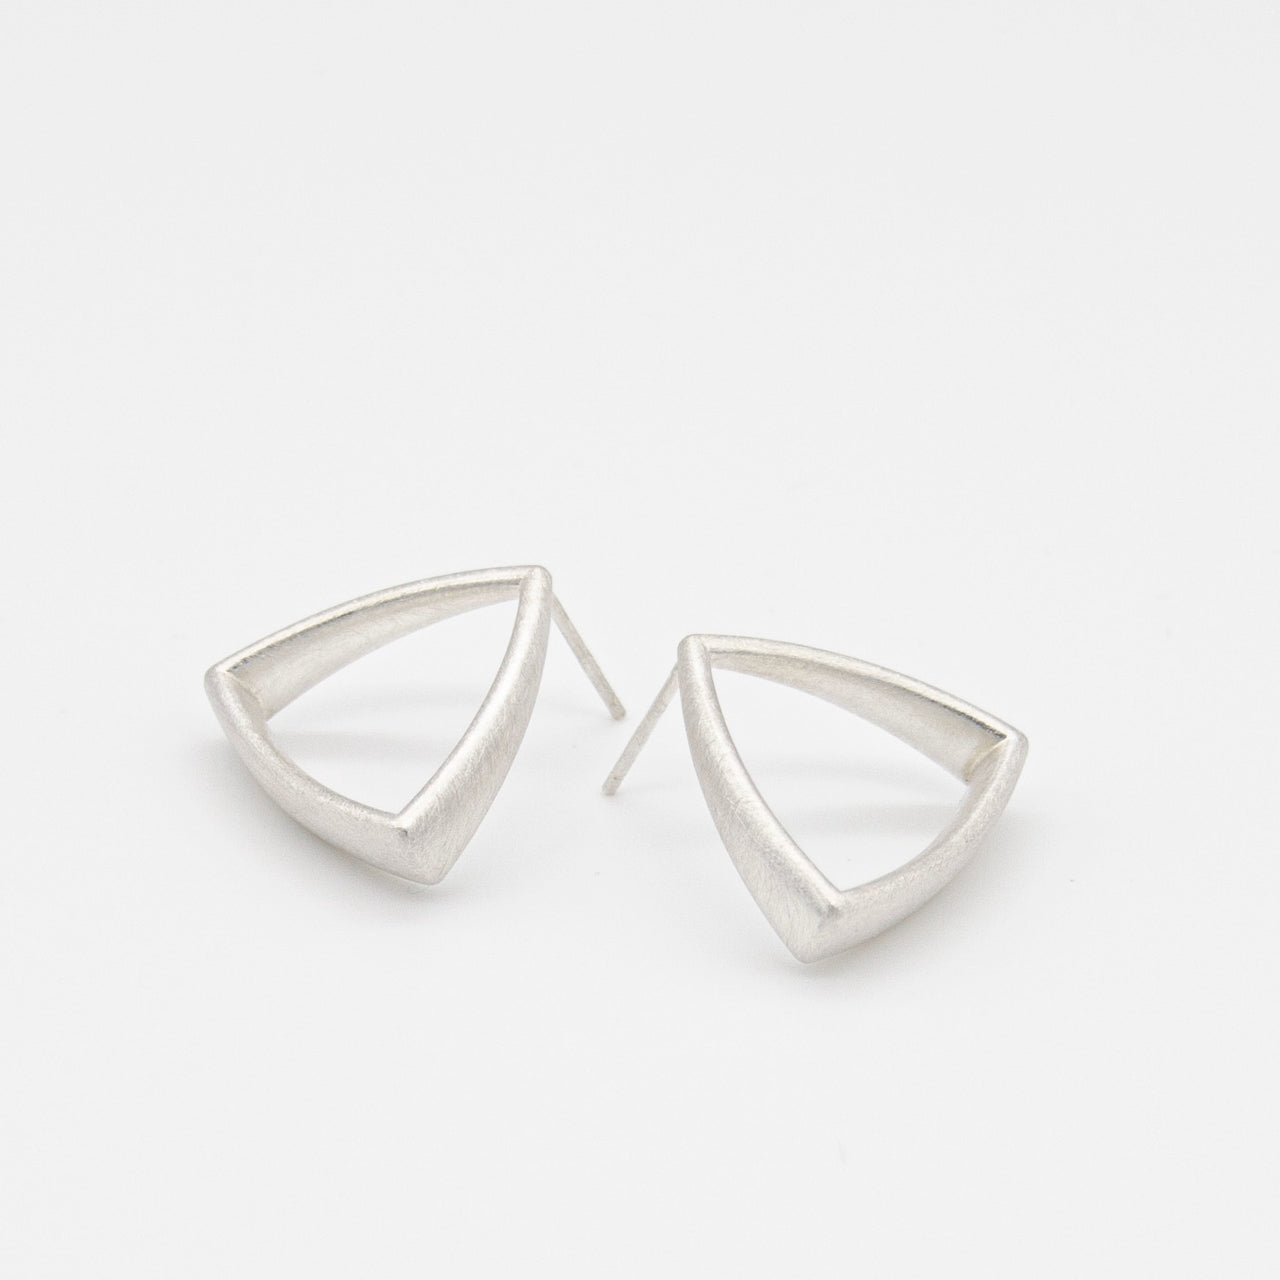 Curved Curves Triangle Earrings Silver